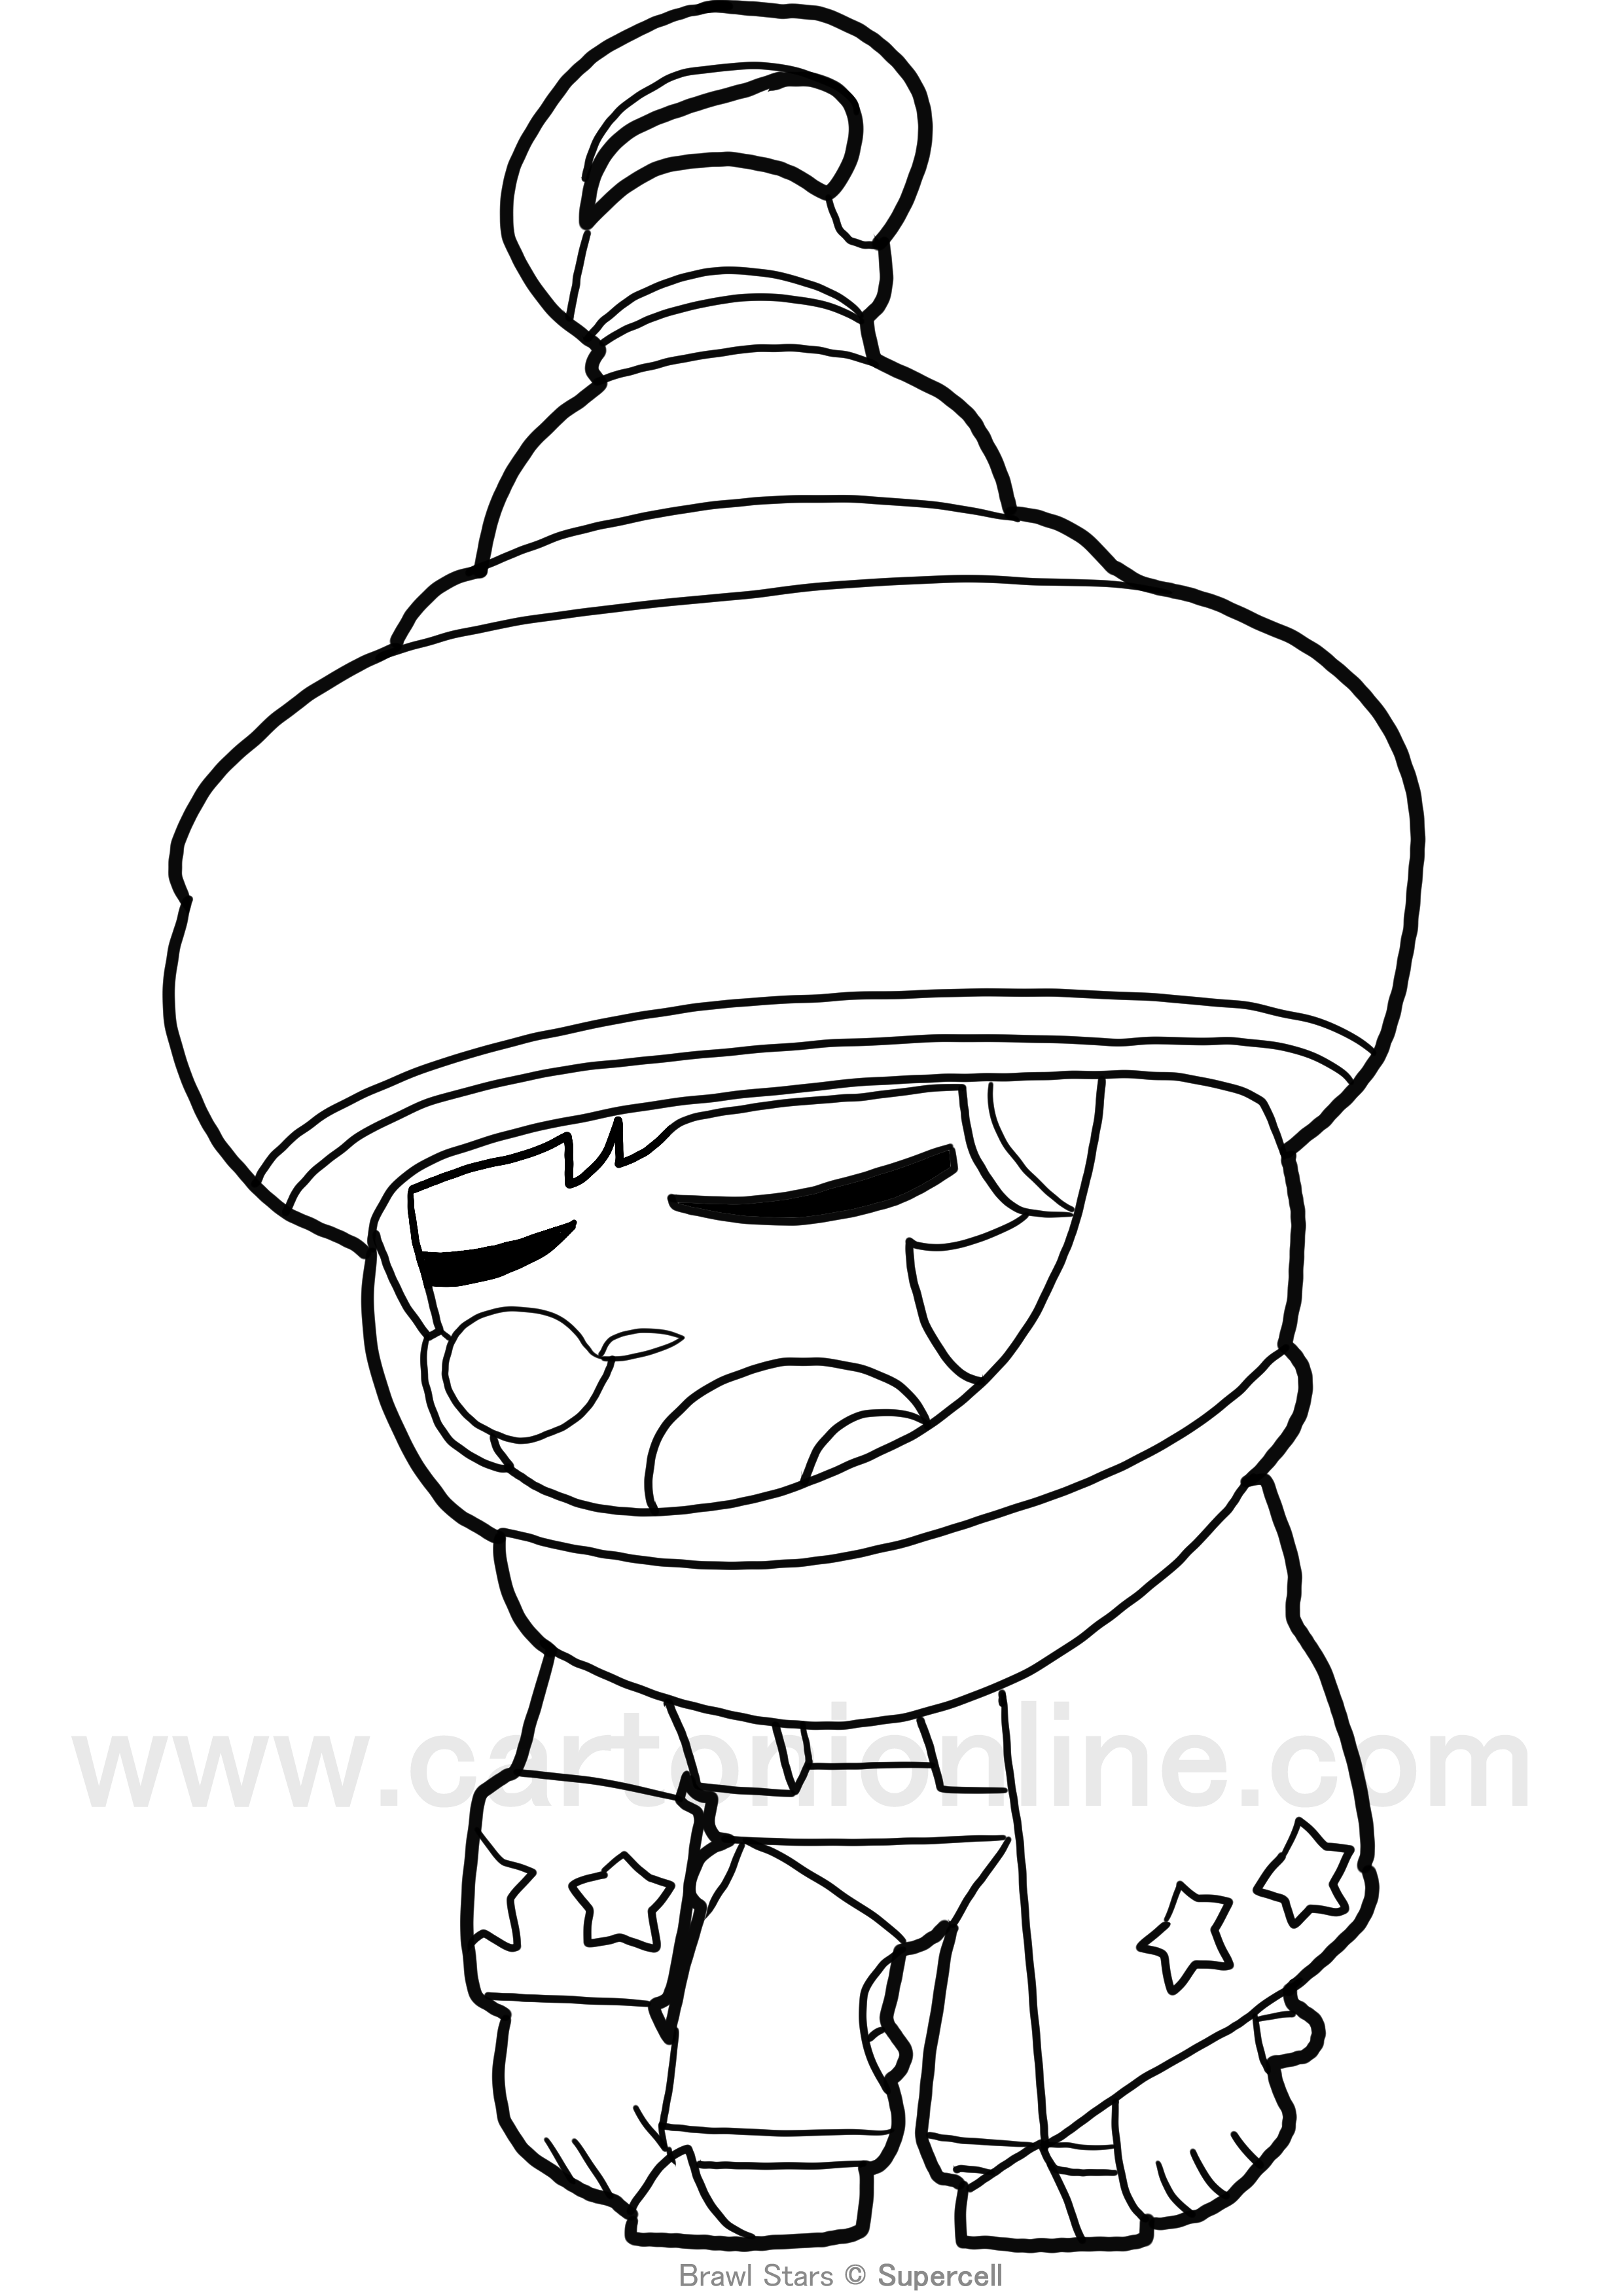 Lantern Sandy from Brawl Stars coloring page to print and coloring